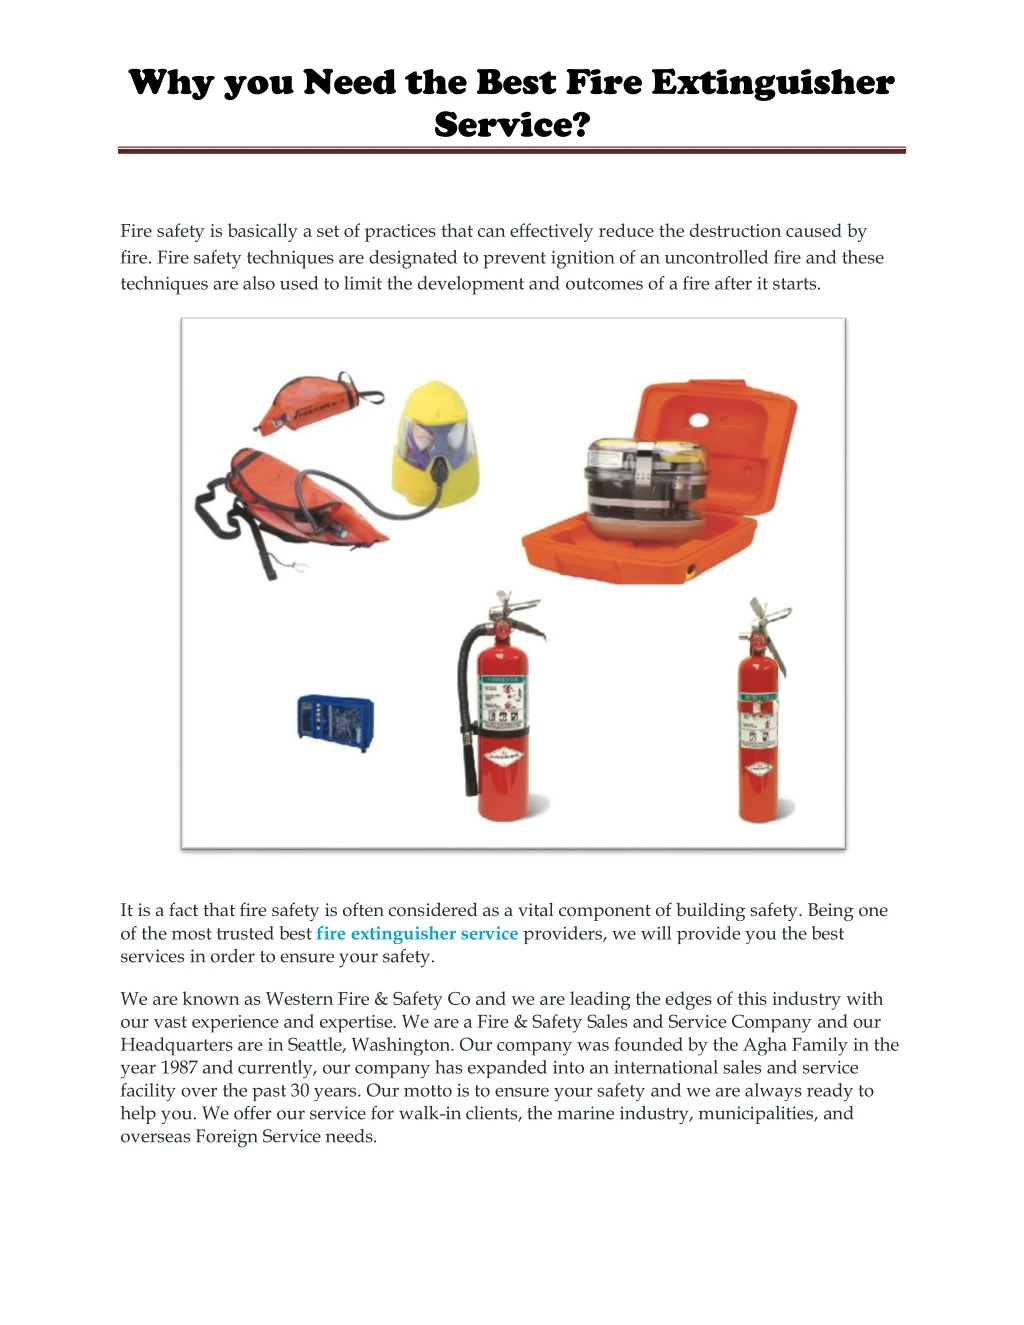 why you need the best fire extinguisher service